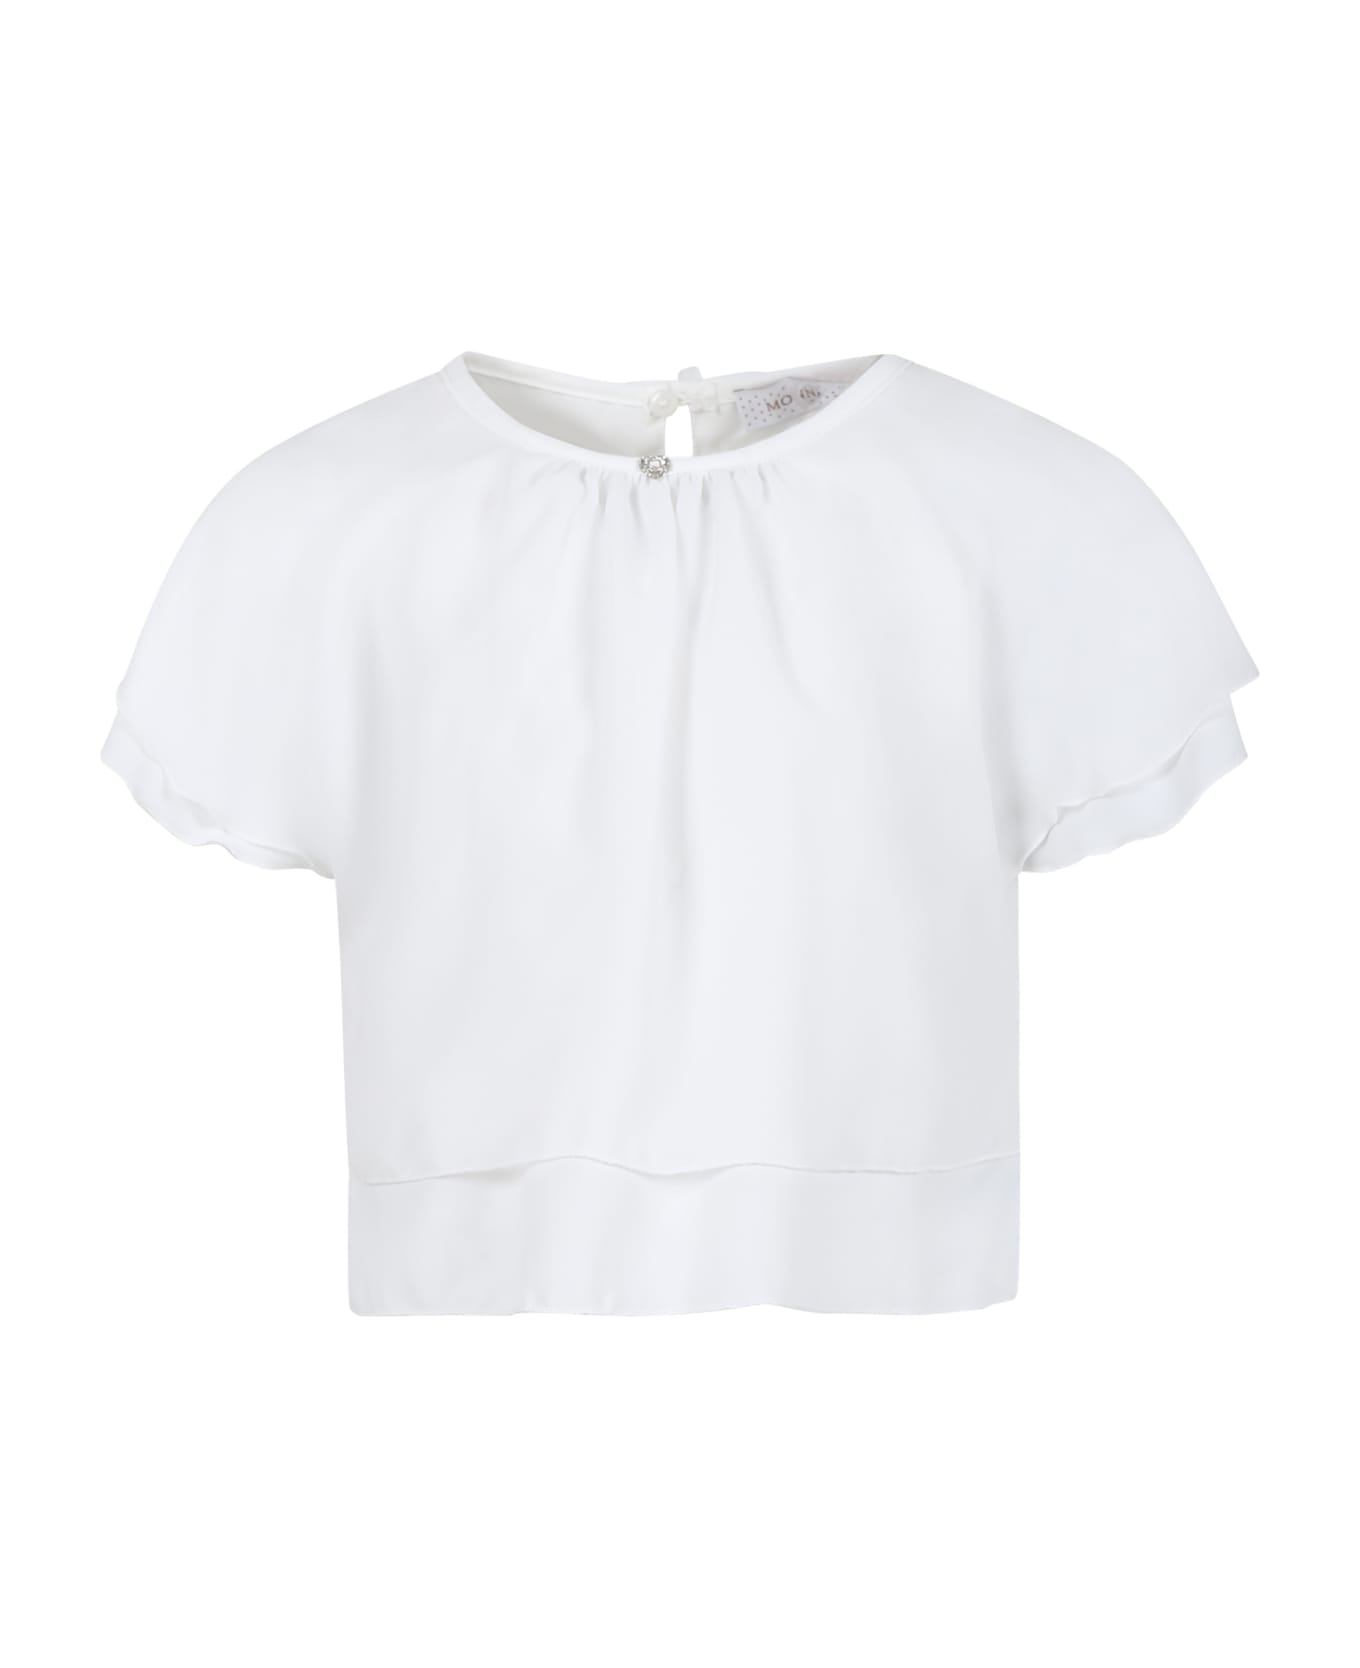 Monnalisa White Top For Girl With Bows - White トップス